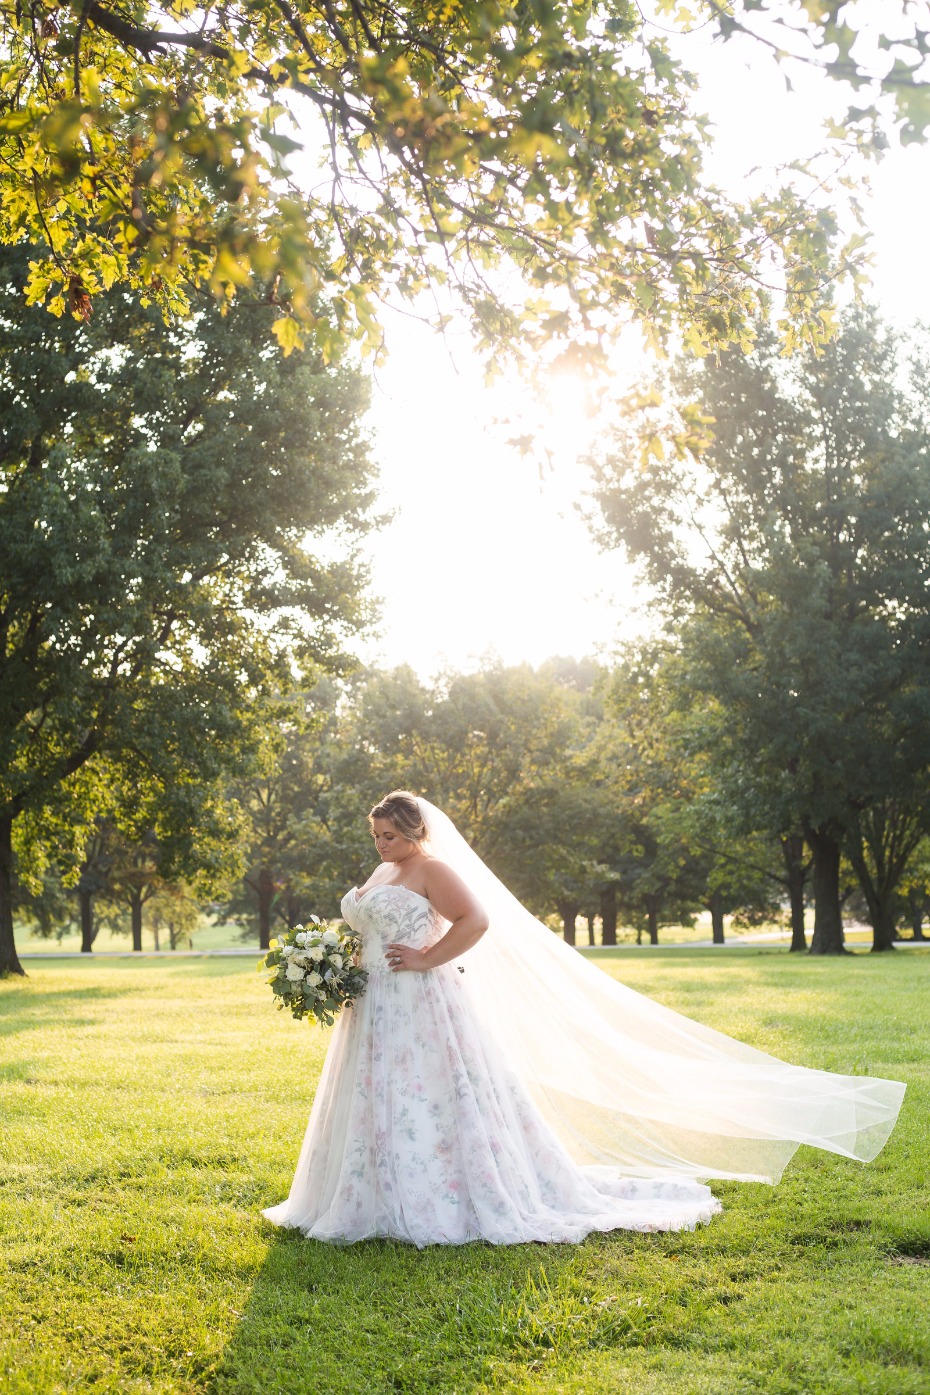 dreamy floral print wedding gown from All My Heart Bridal